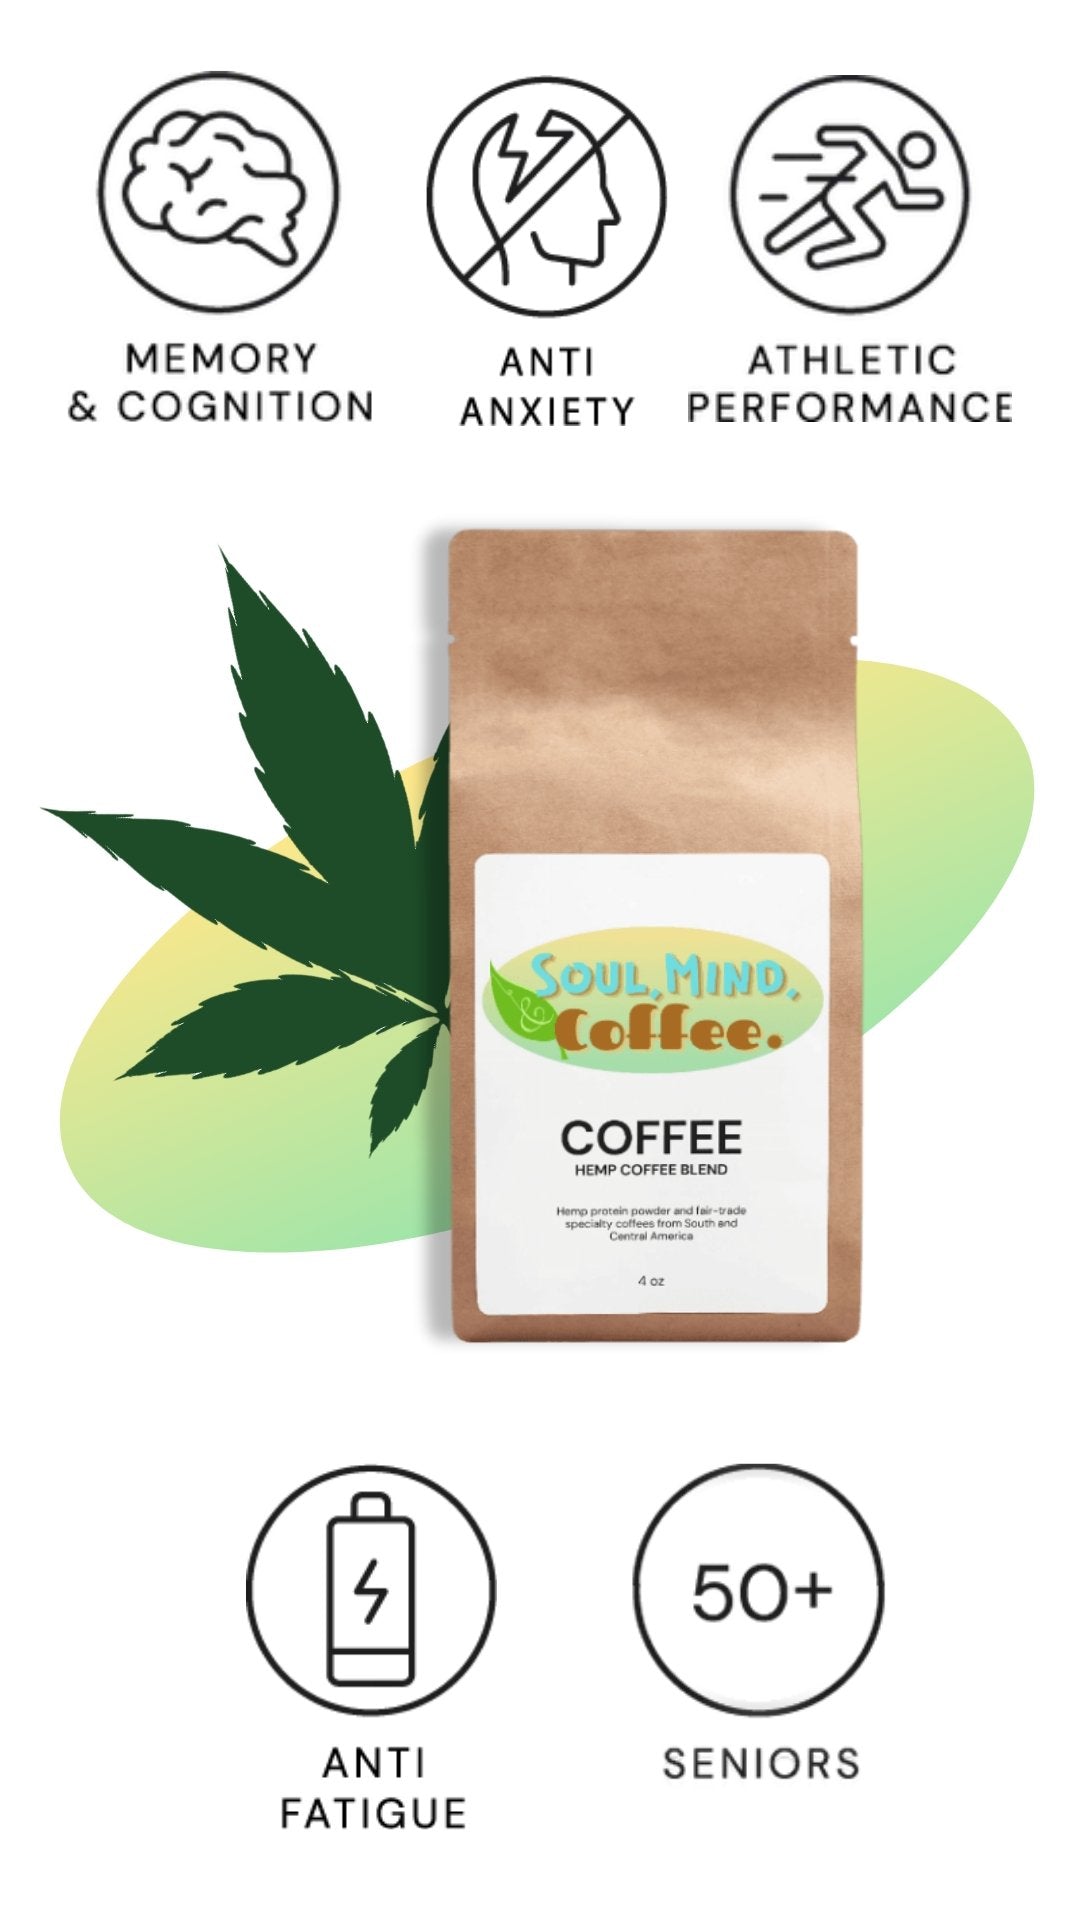  A bag of 4oz hemp coffee blend, with a label that says "Hemp Coffee Blend - 4oz - Perfect for on-the-go, this small bag of hemp coffee blend is packed with energy and flavor." science organic natural health